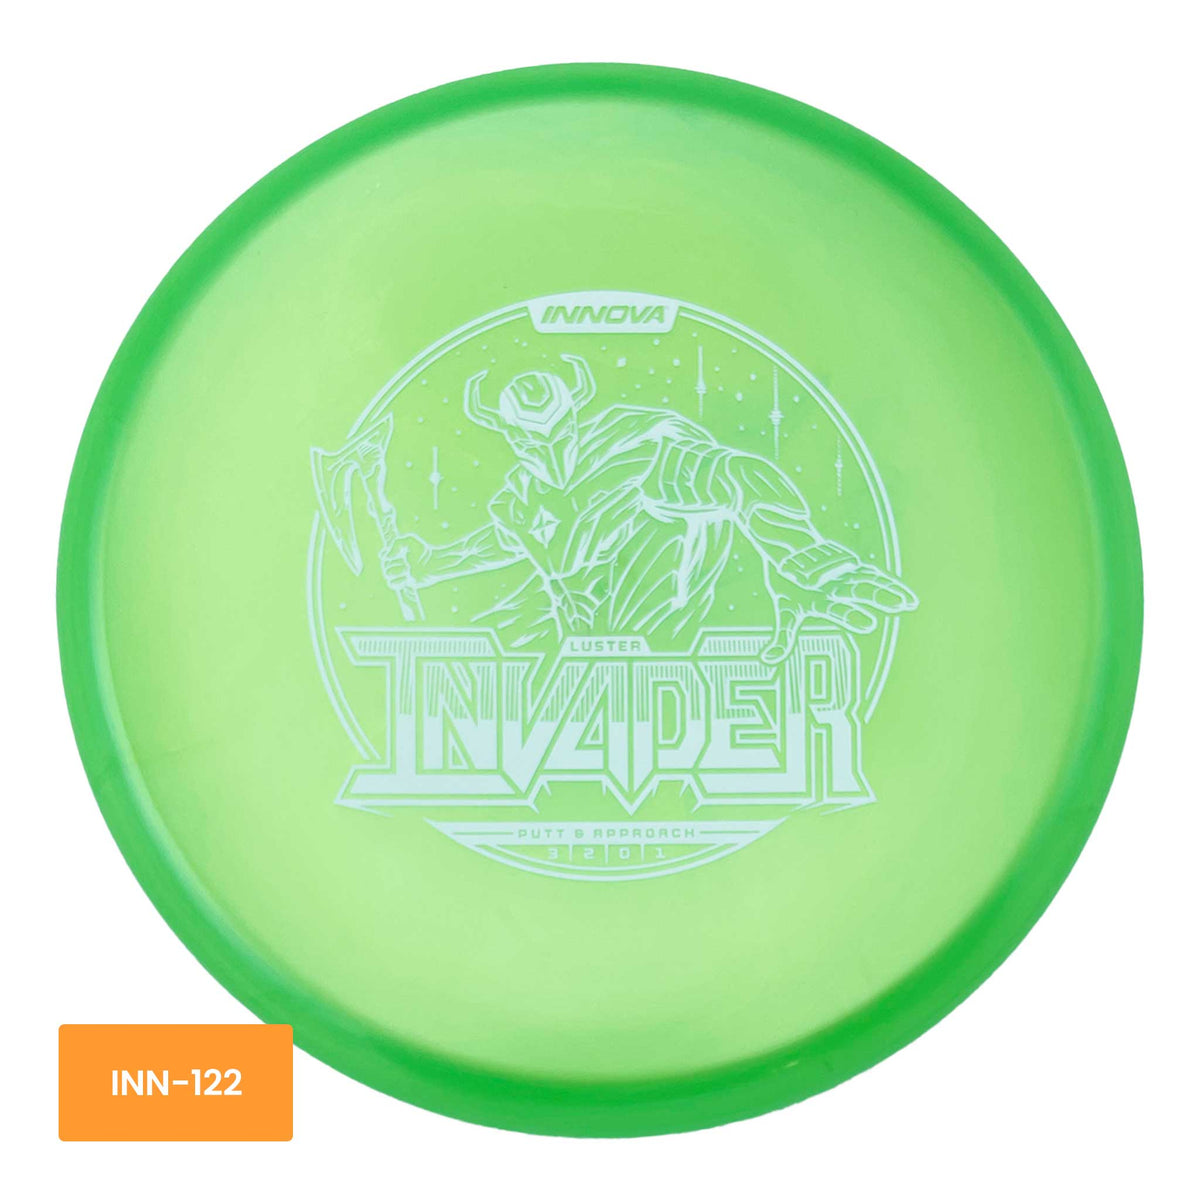 Innova Disc Golf Luster Invader putter and approach - Green